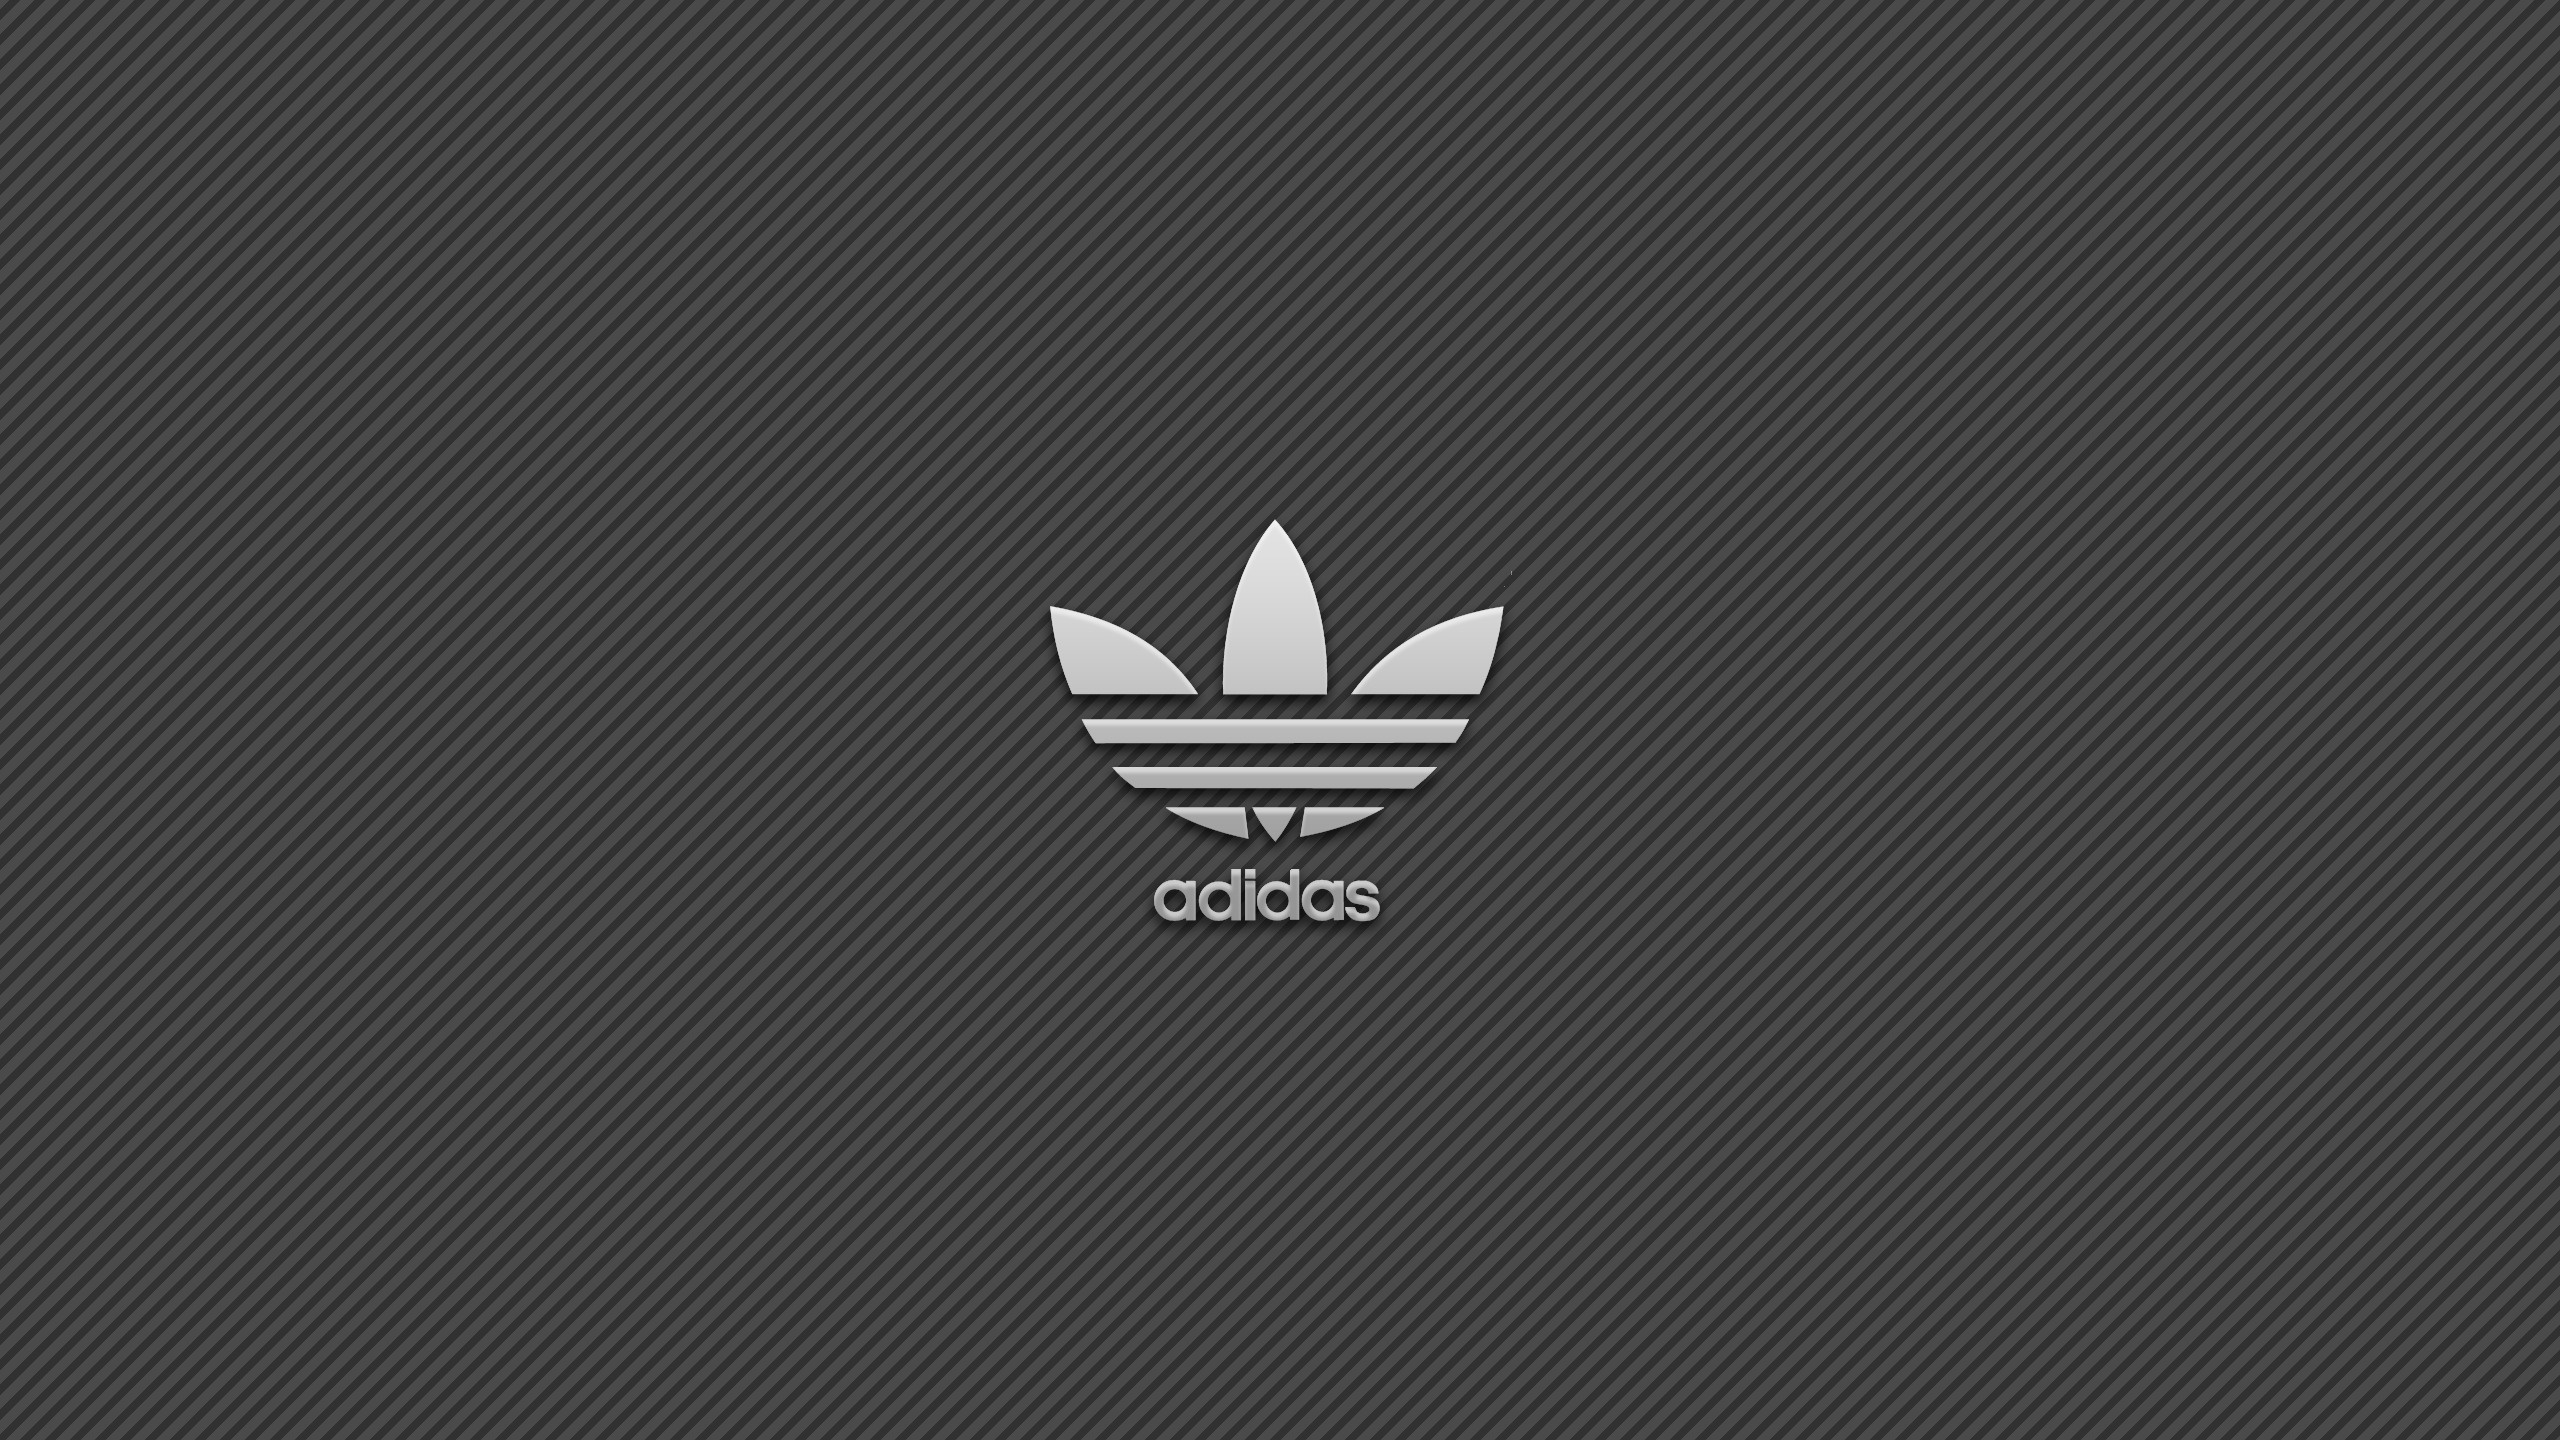 Adidas Simple Logo Background for 2560x1440 HDTV resolution